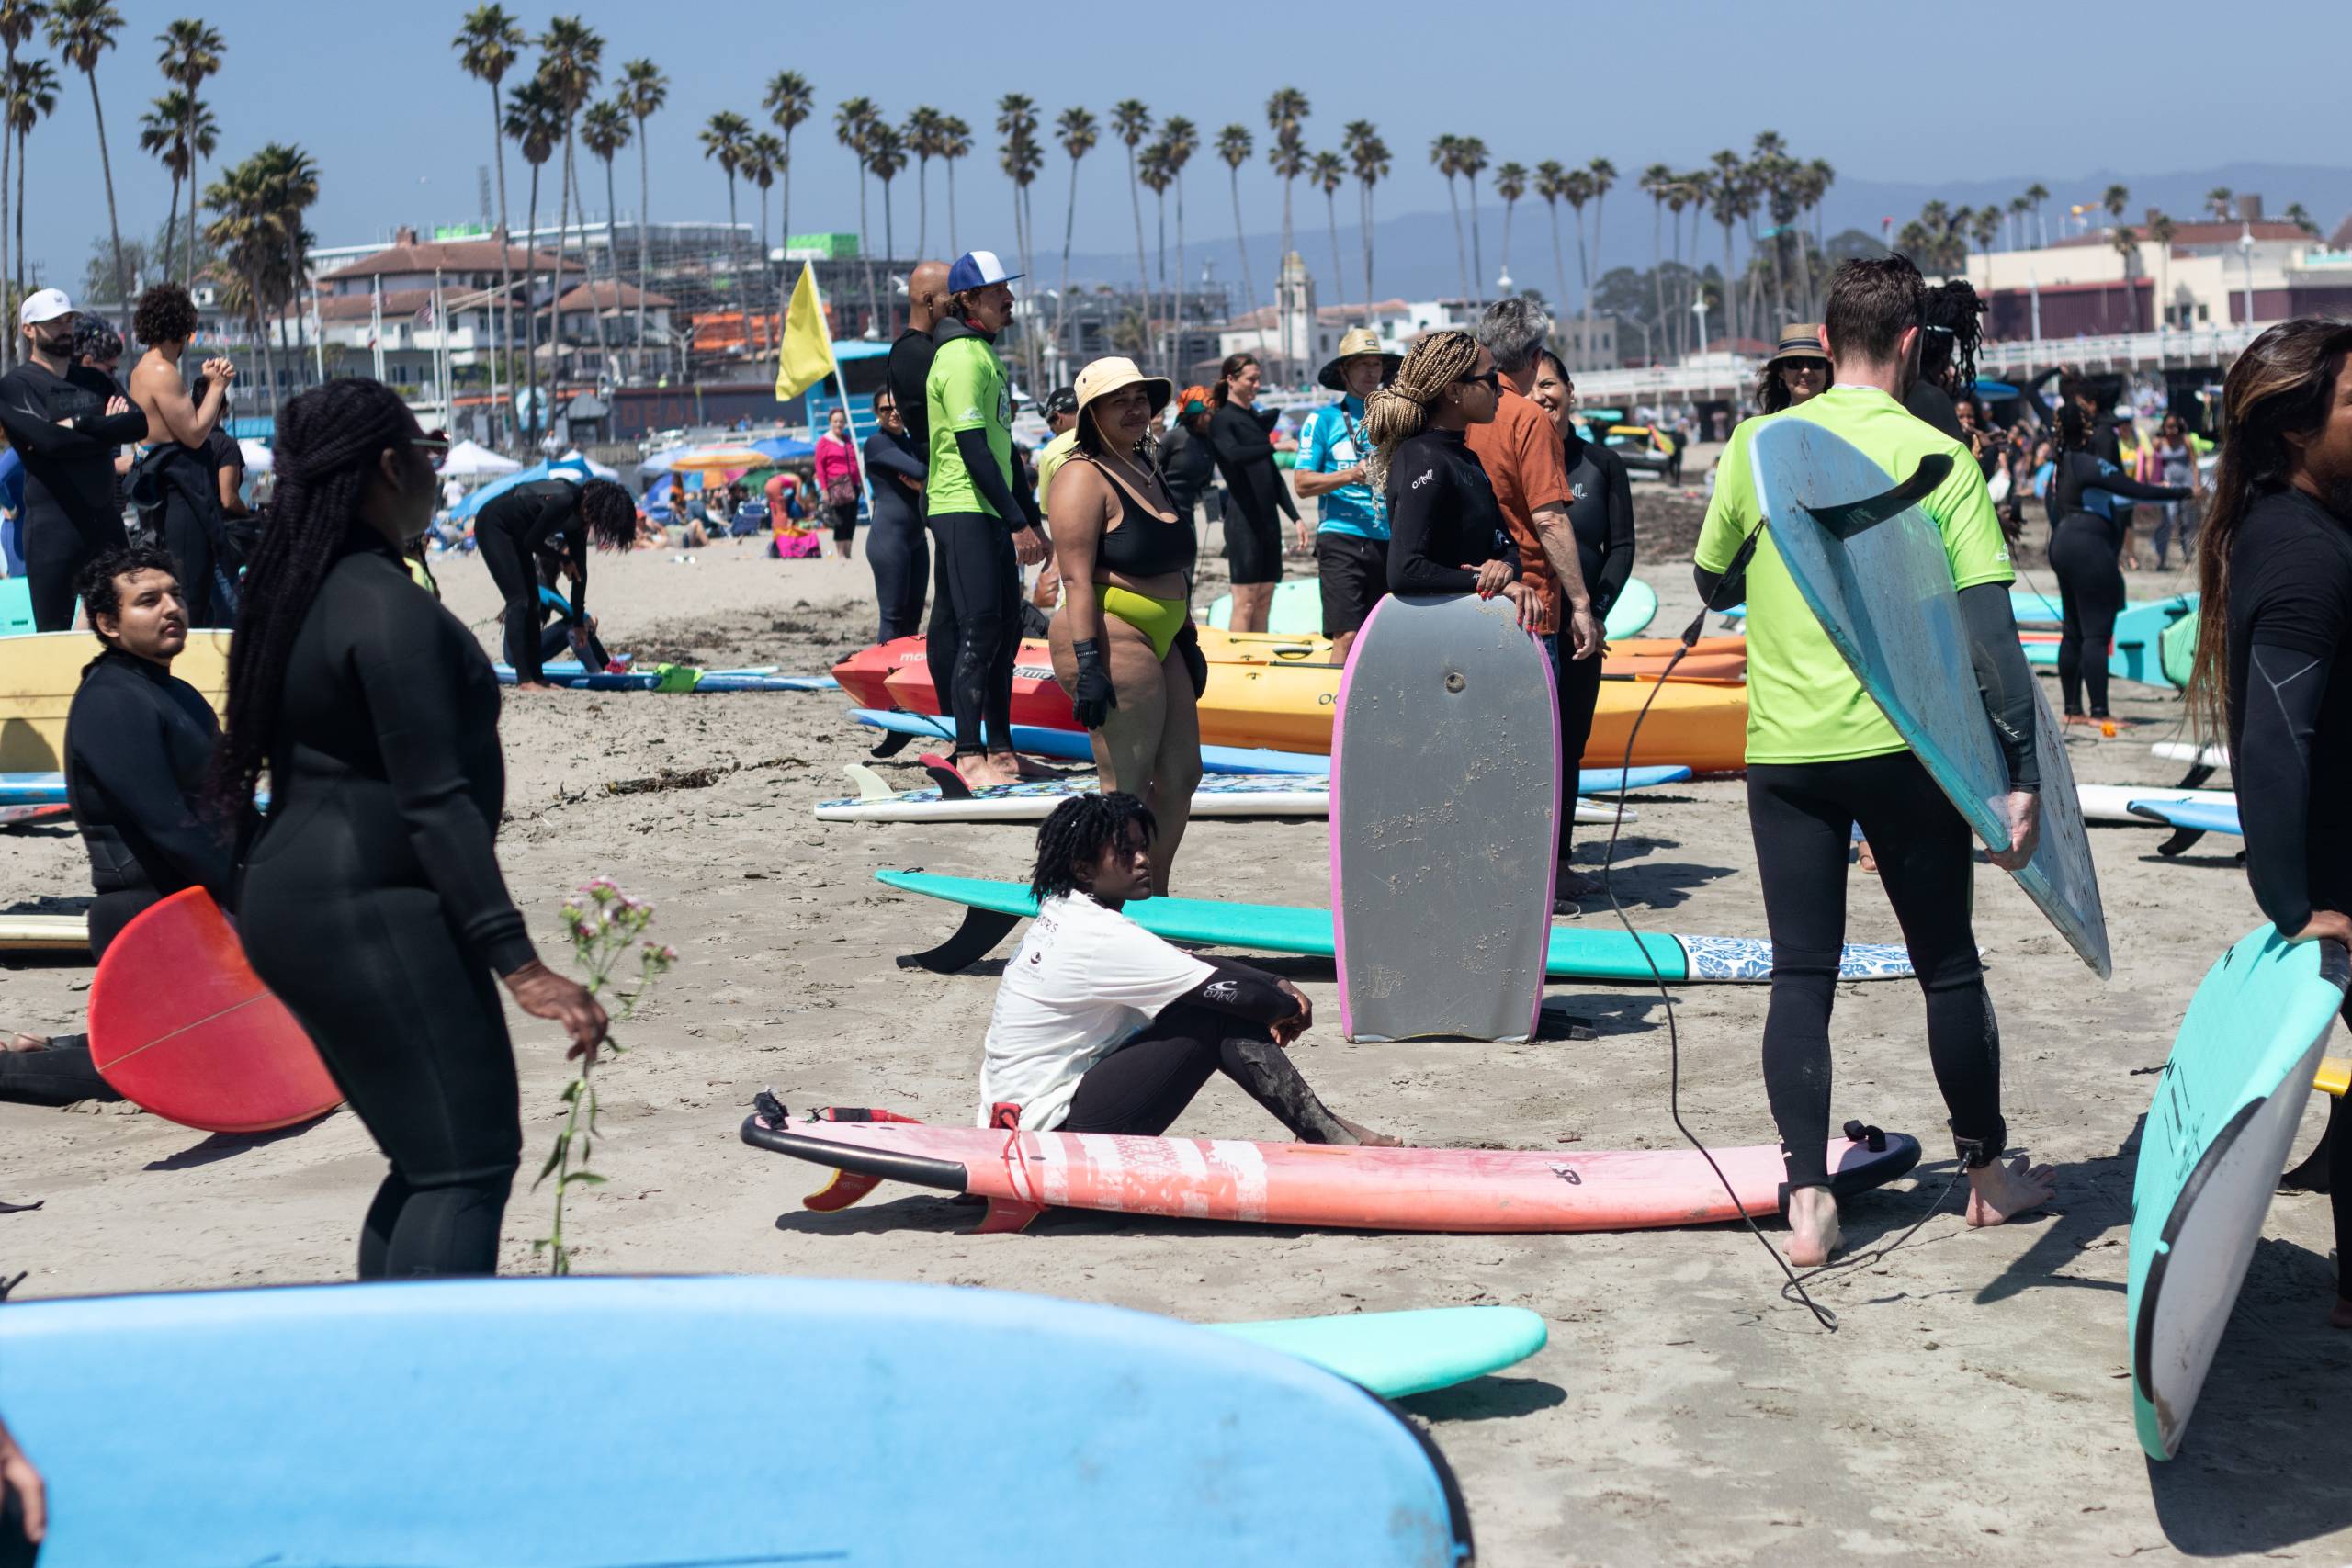 Surfers gather on a crowded beach.